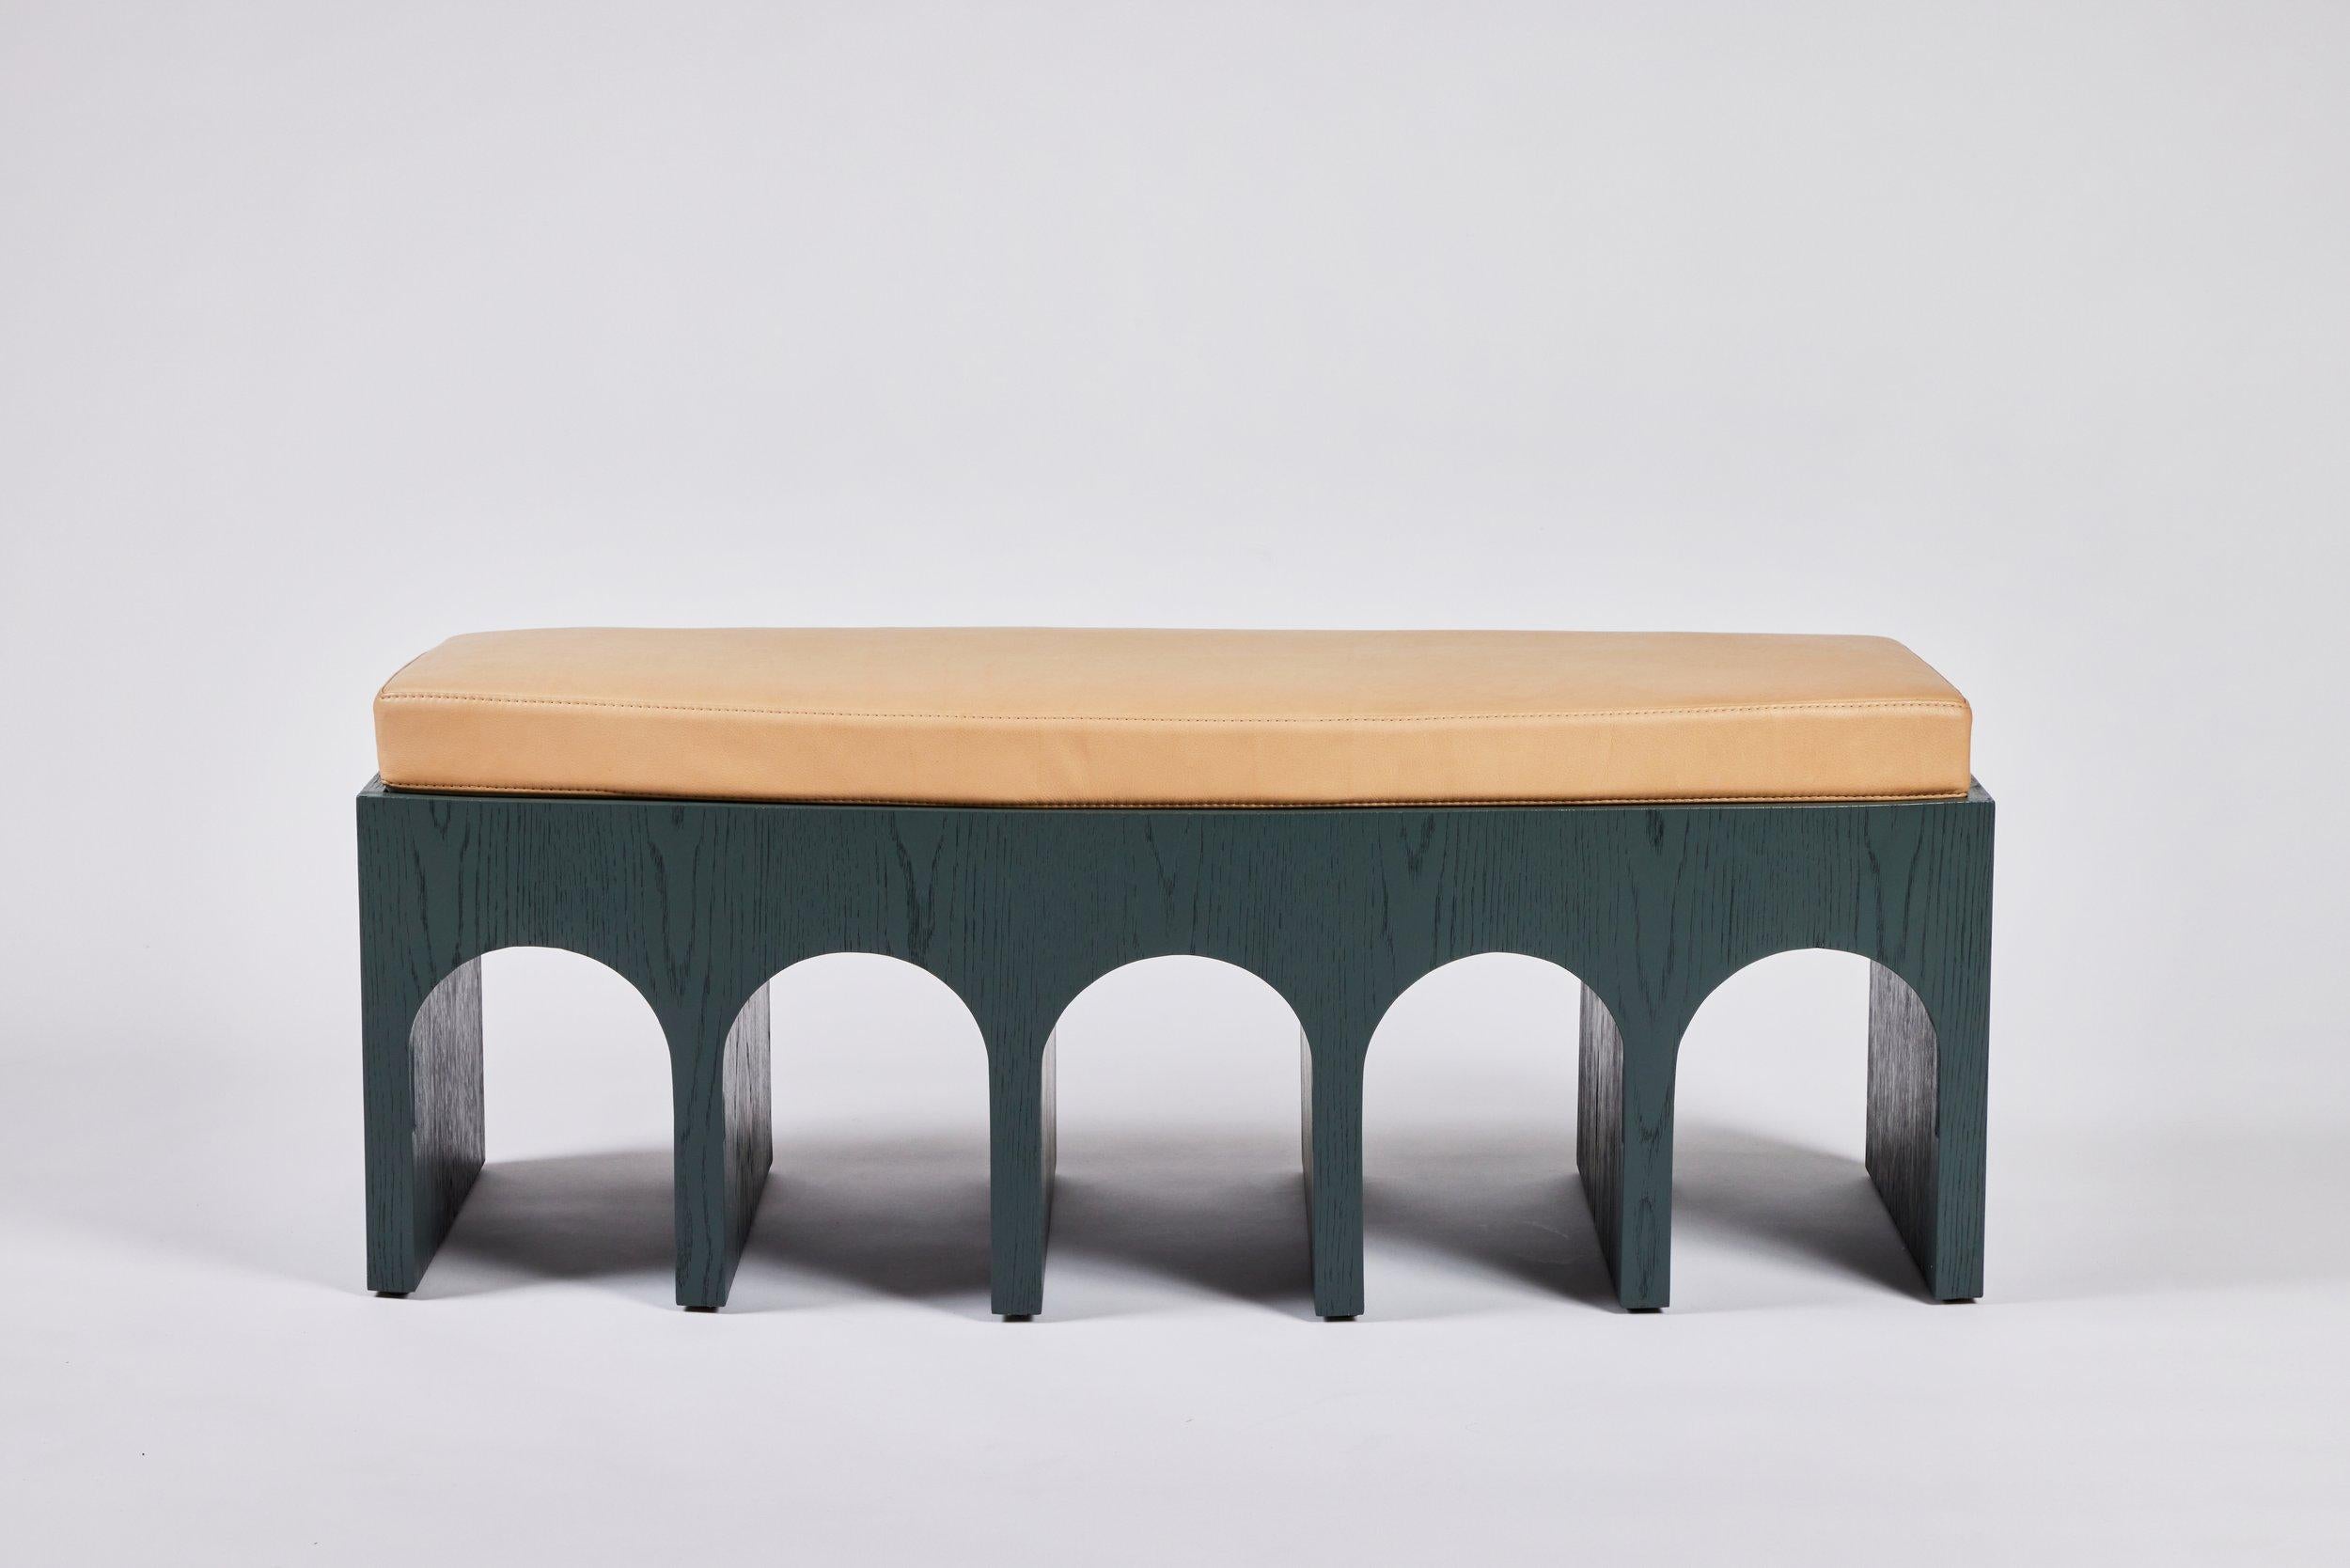 Martin & Brockett's Arcade Bench 48” in Lacquer is a nod to the ancient Roman architectural form- a succession of contiguous arches supported by columns. It features a slight convex curvature at the face and natural grain texture.

Shown in Lichen